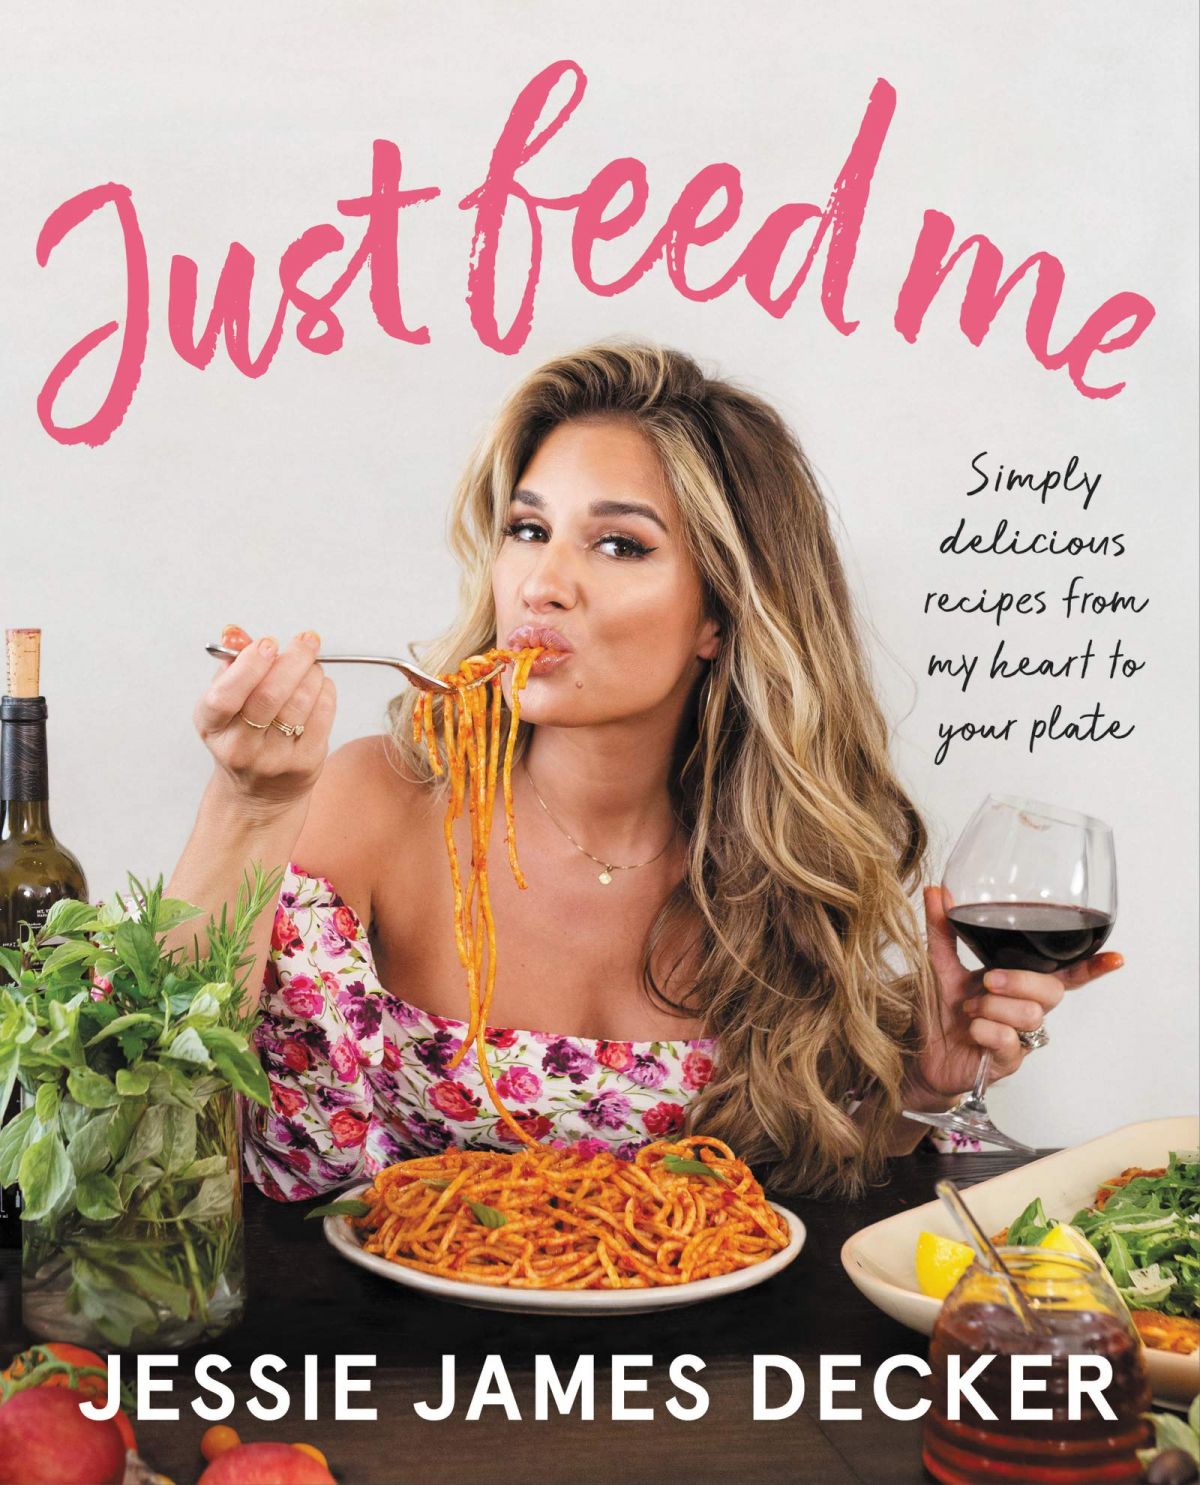 Jesse James on the Cover of Her Just Feed Me Book, 2020 Issue